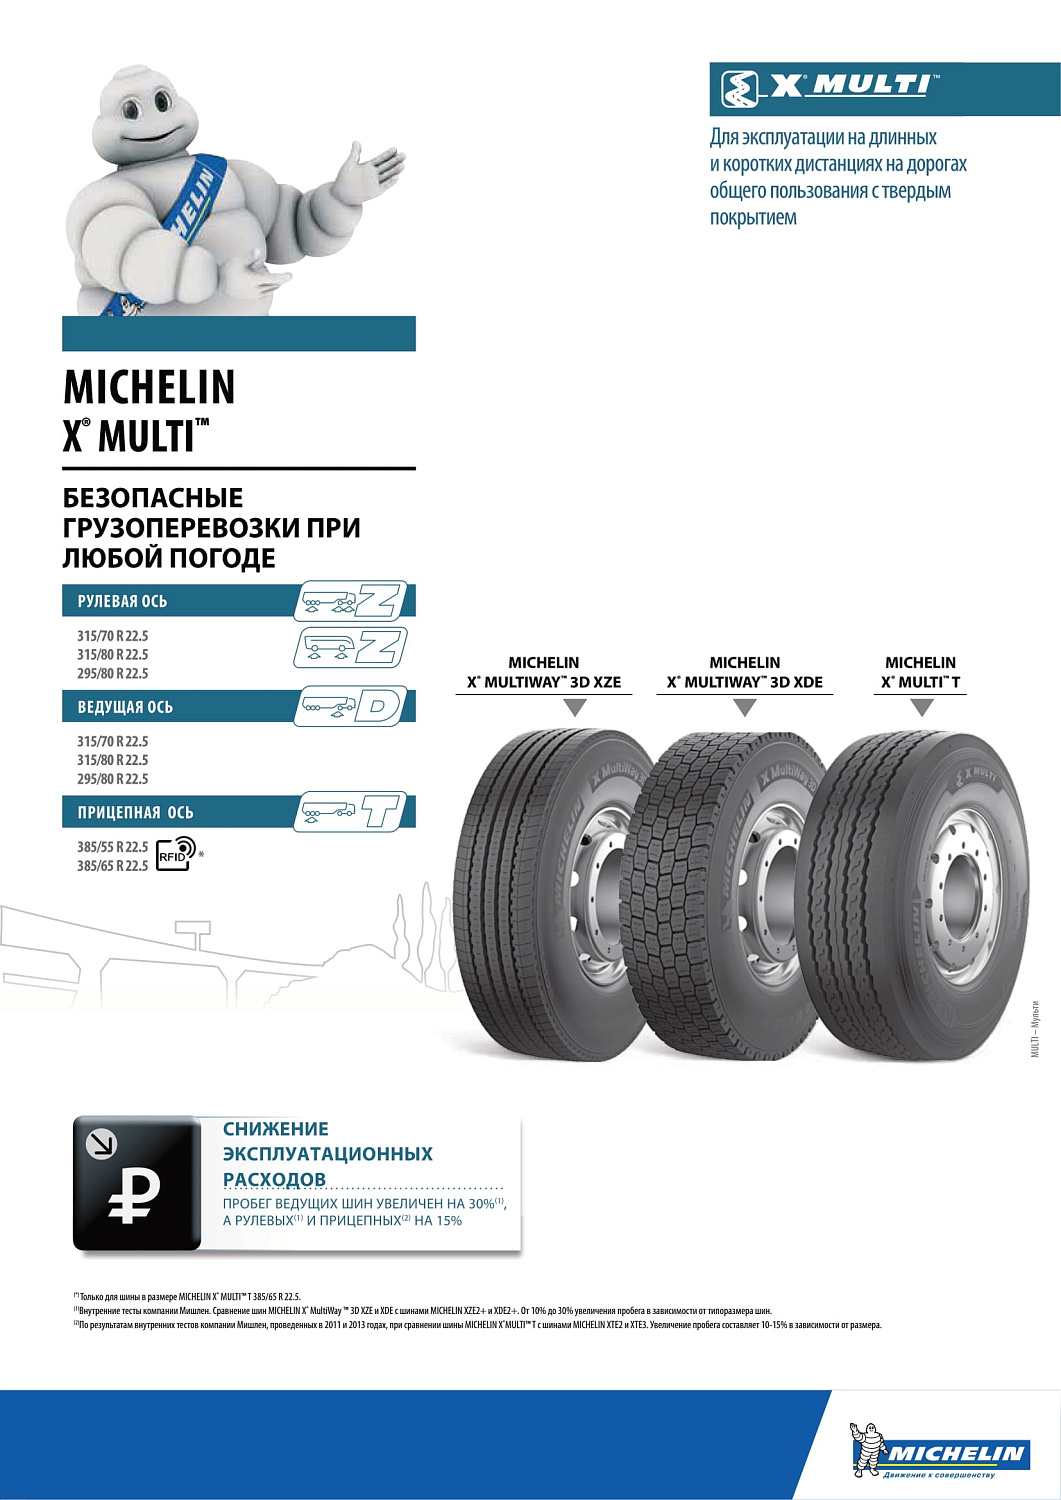 Michelin X Multiway 3D XDE 295/80 R22.5